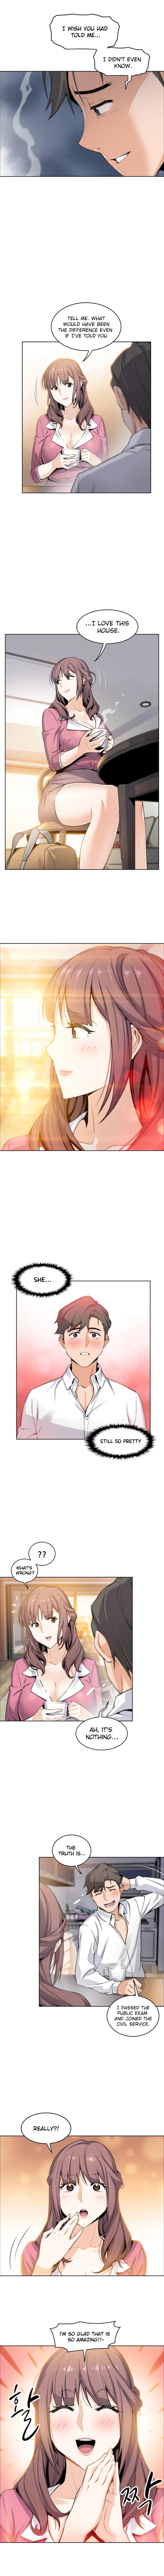 Housekeeper Manhwa - Chapter 8 Page 4